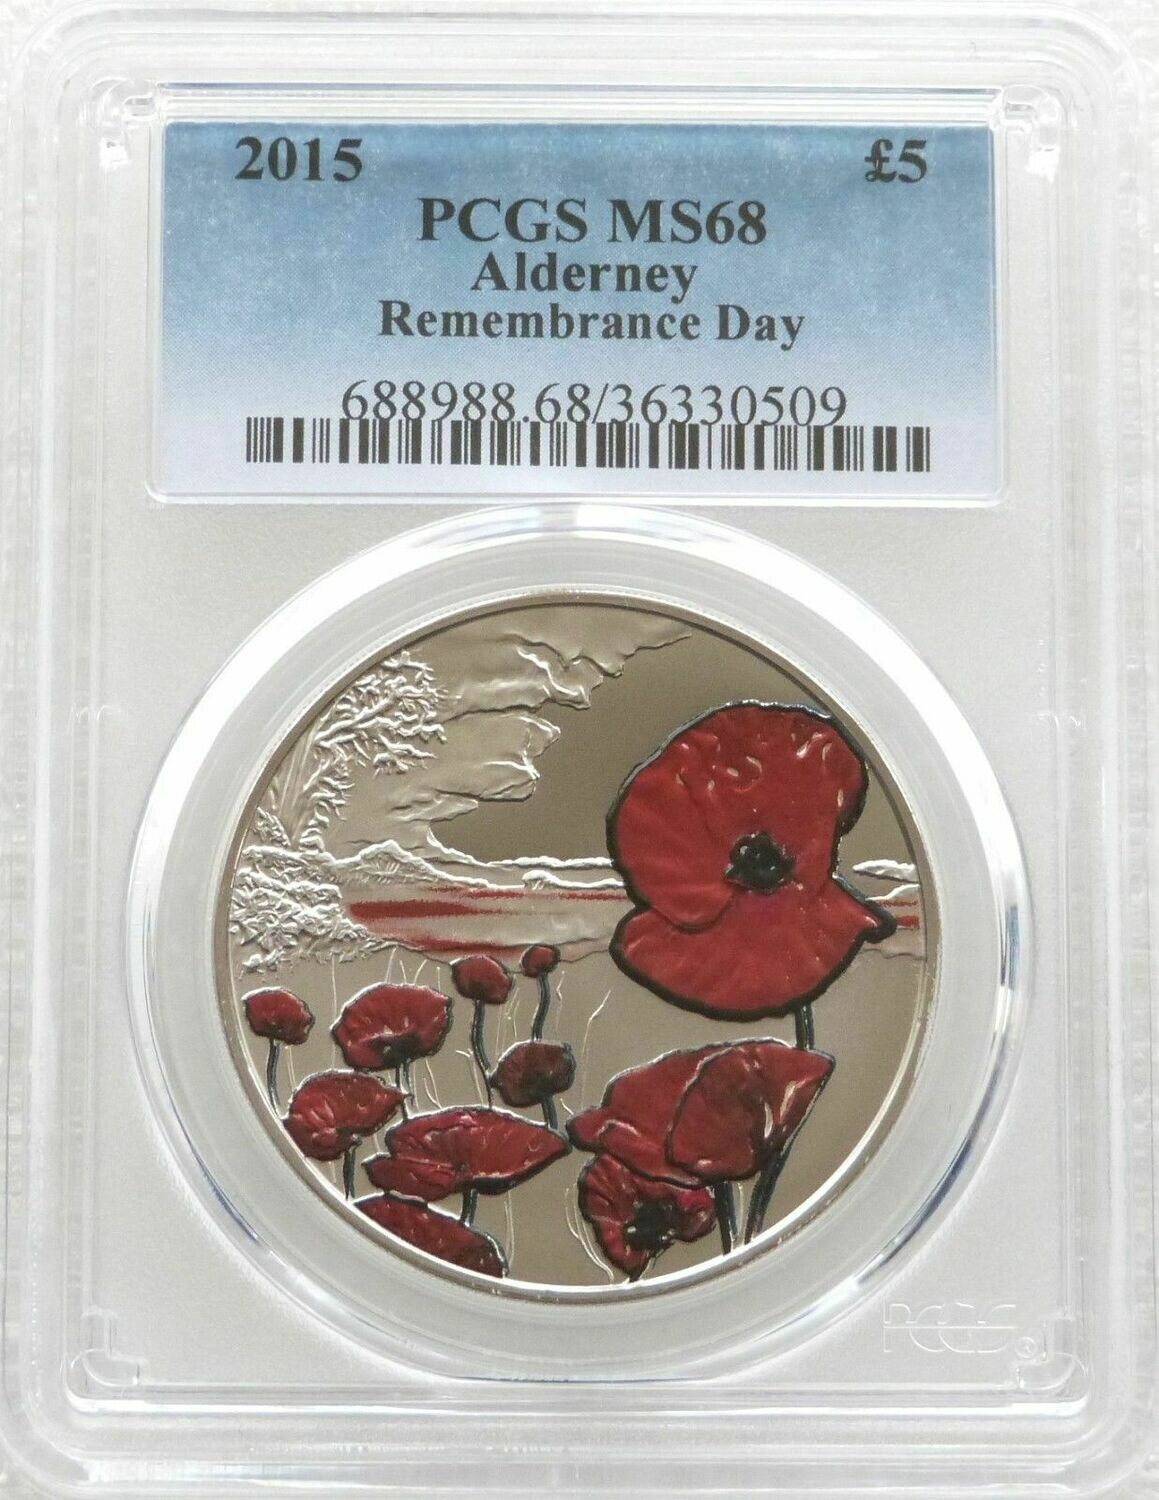 2015 Alderney Remembrance Day Poppy £5 Brilliant Uncirculated Coin PCGS MS68